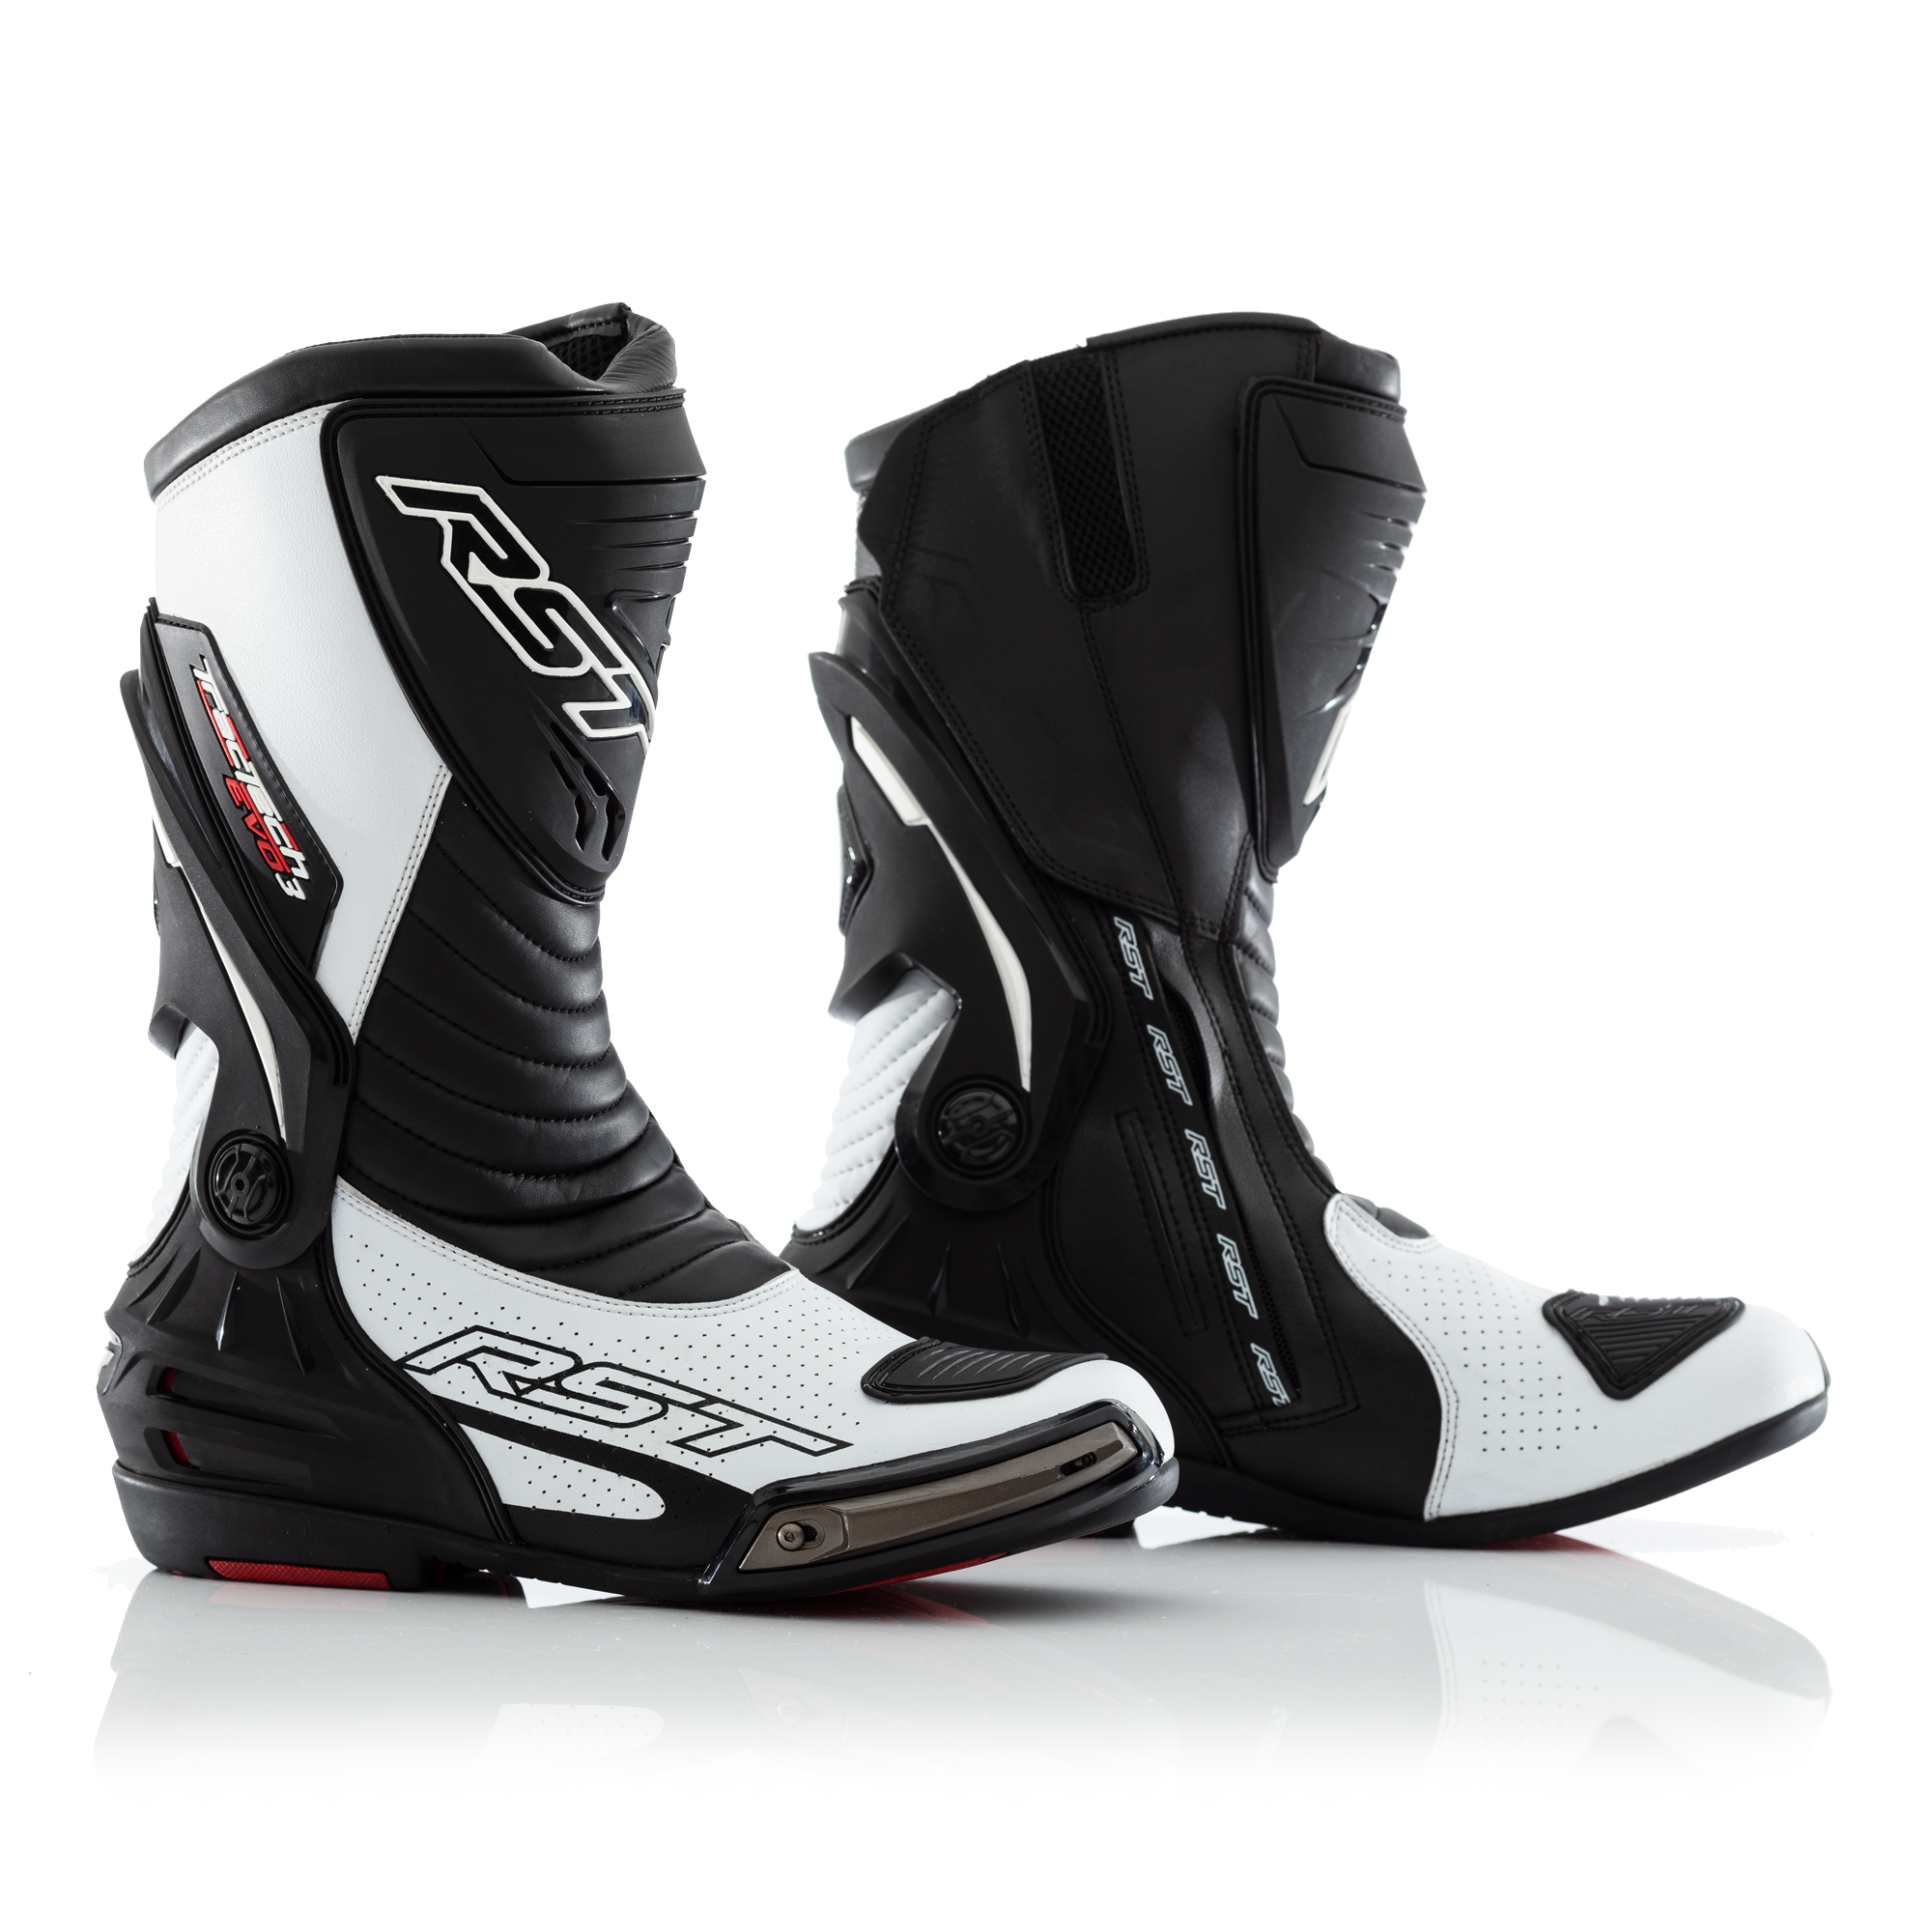 rst boots uk